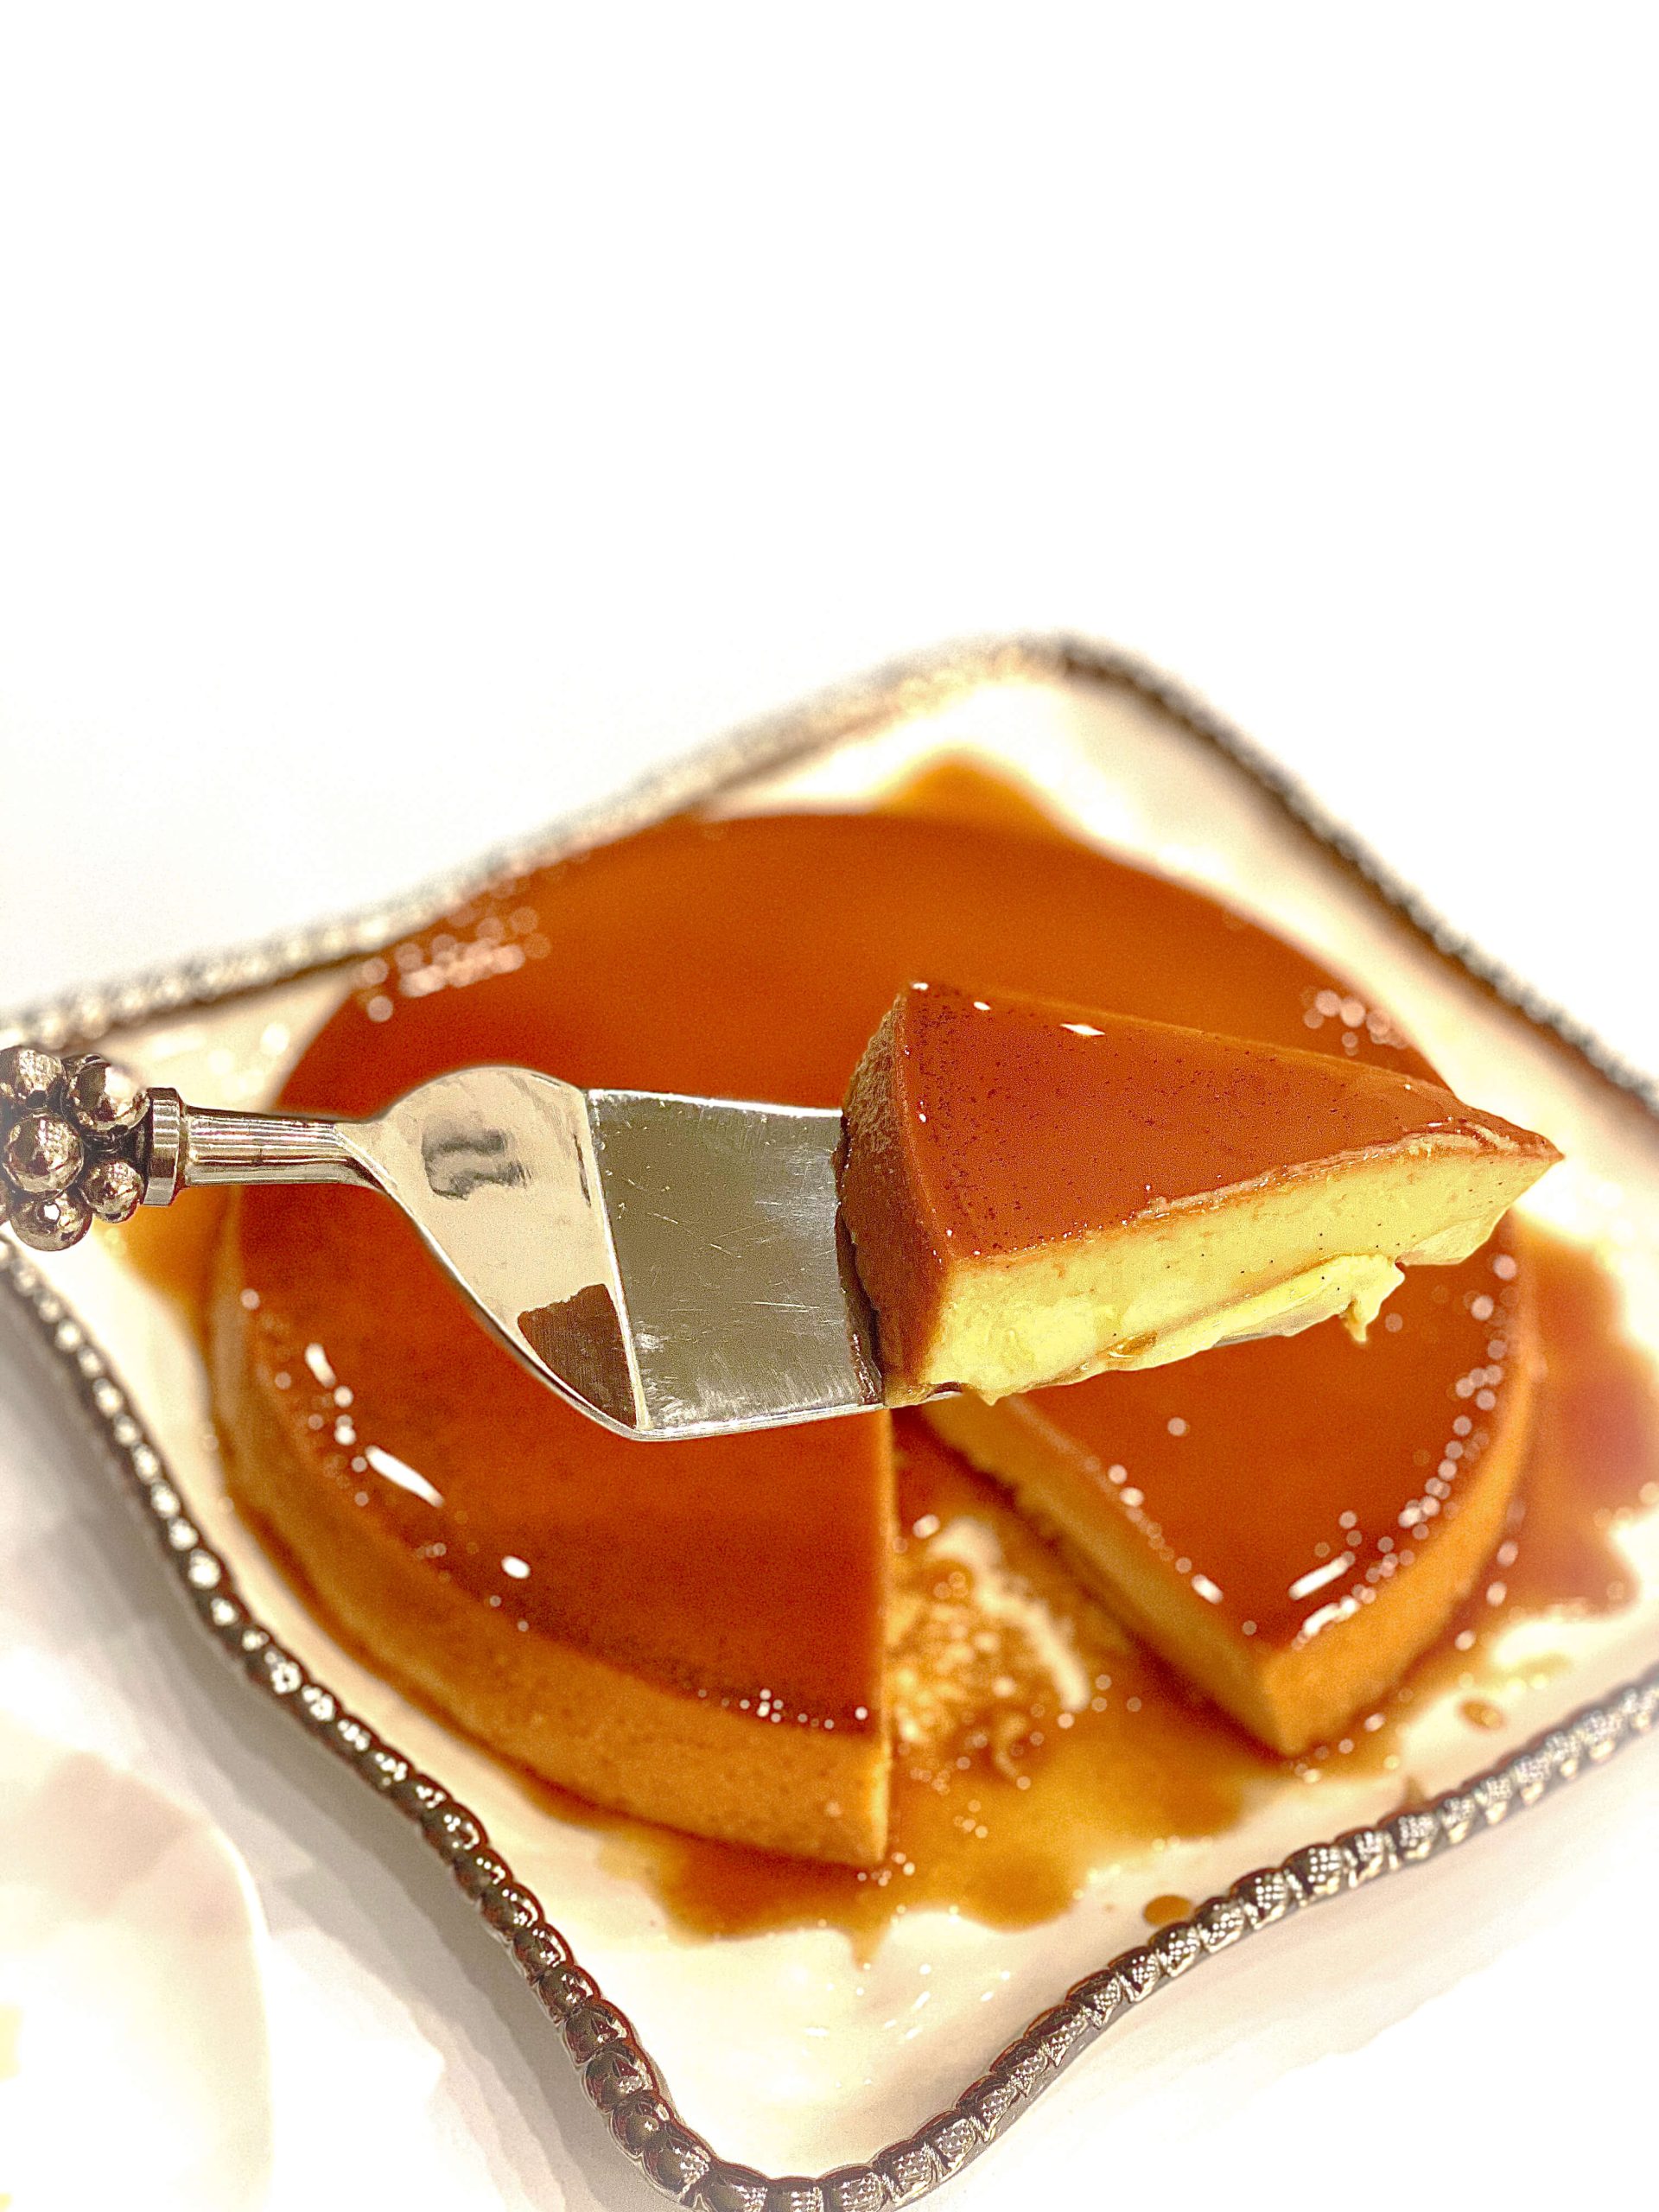 close up image of flan after cooking